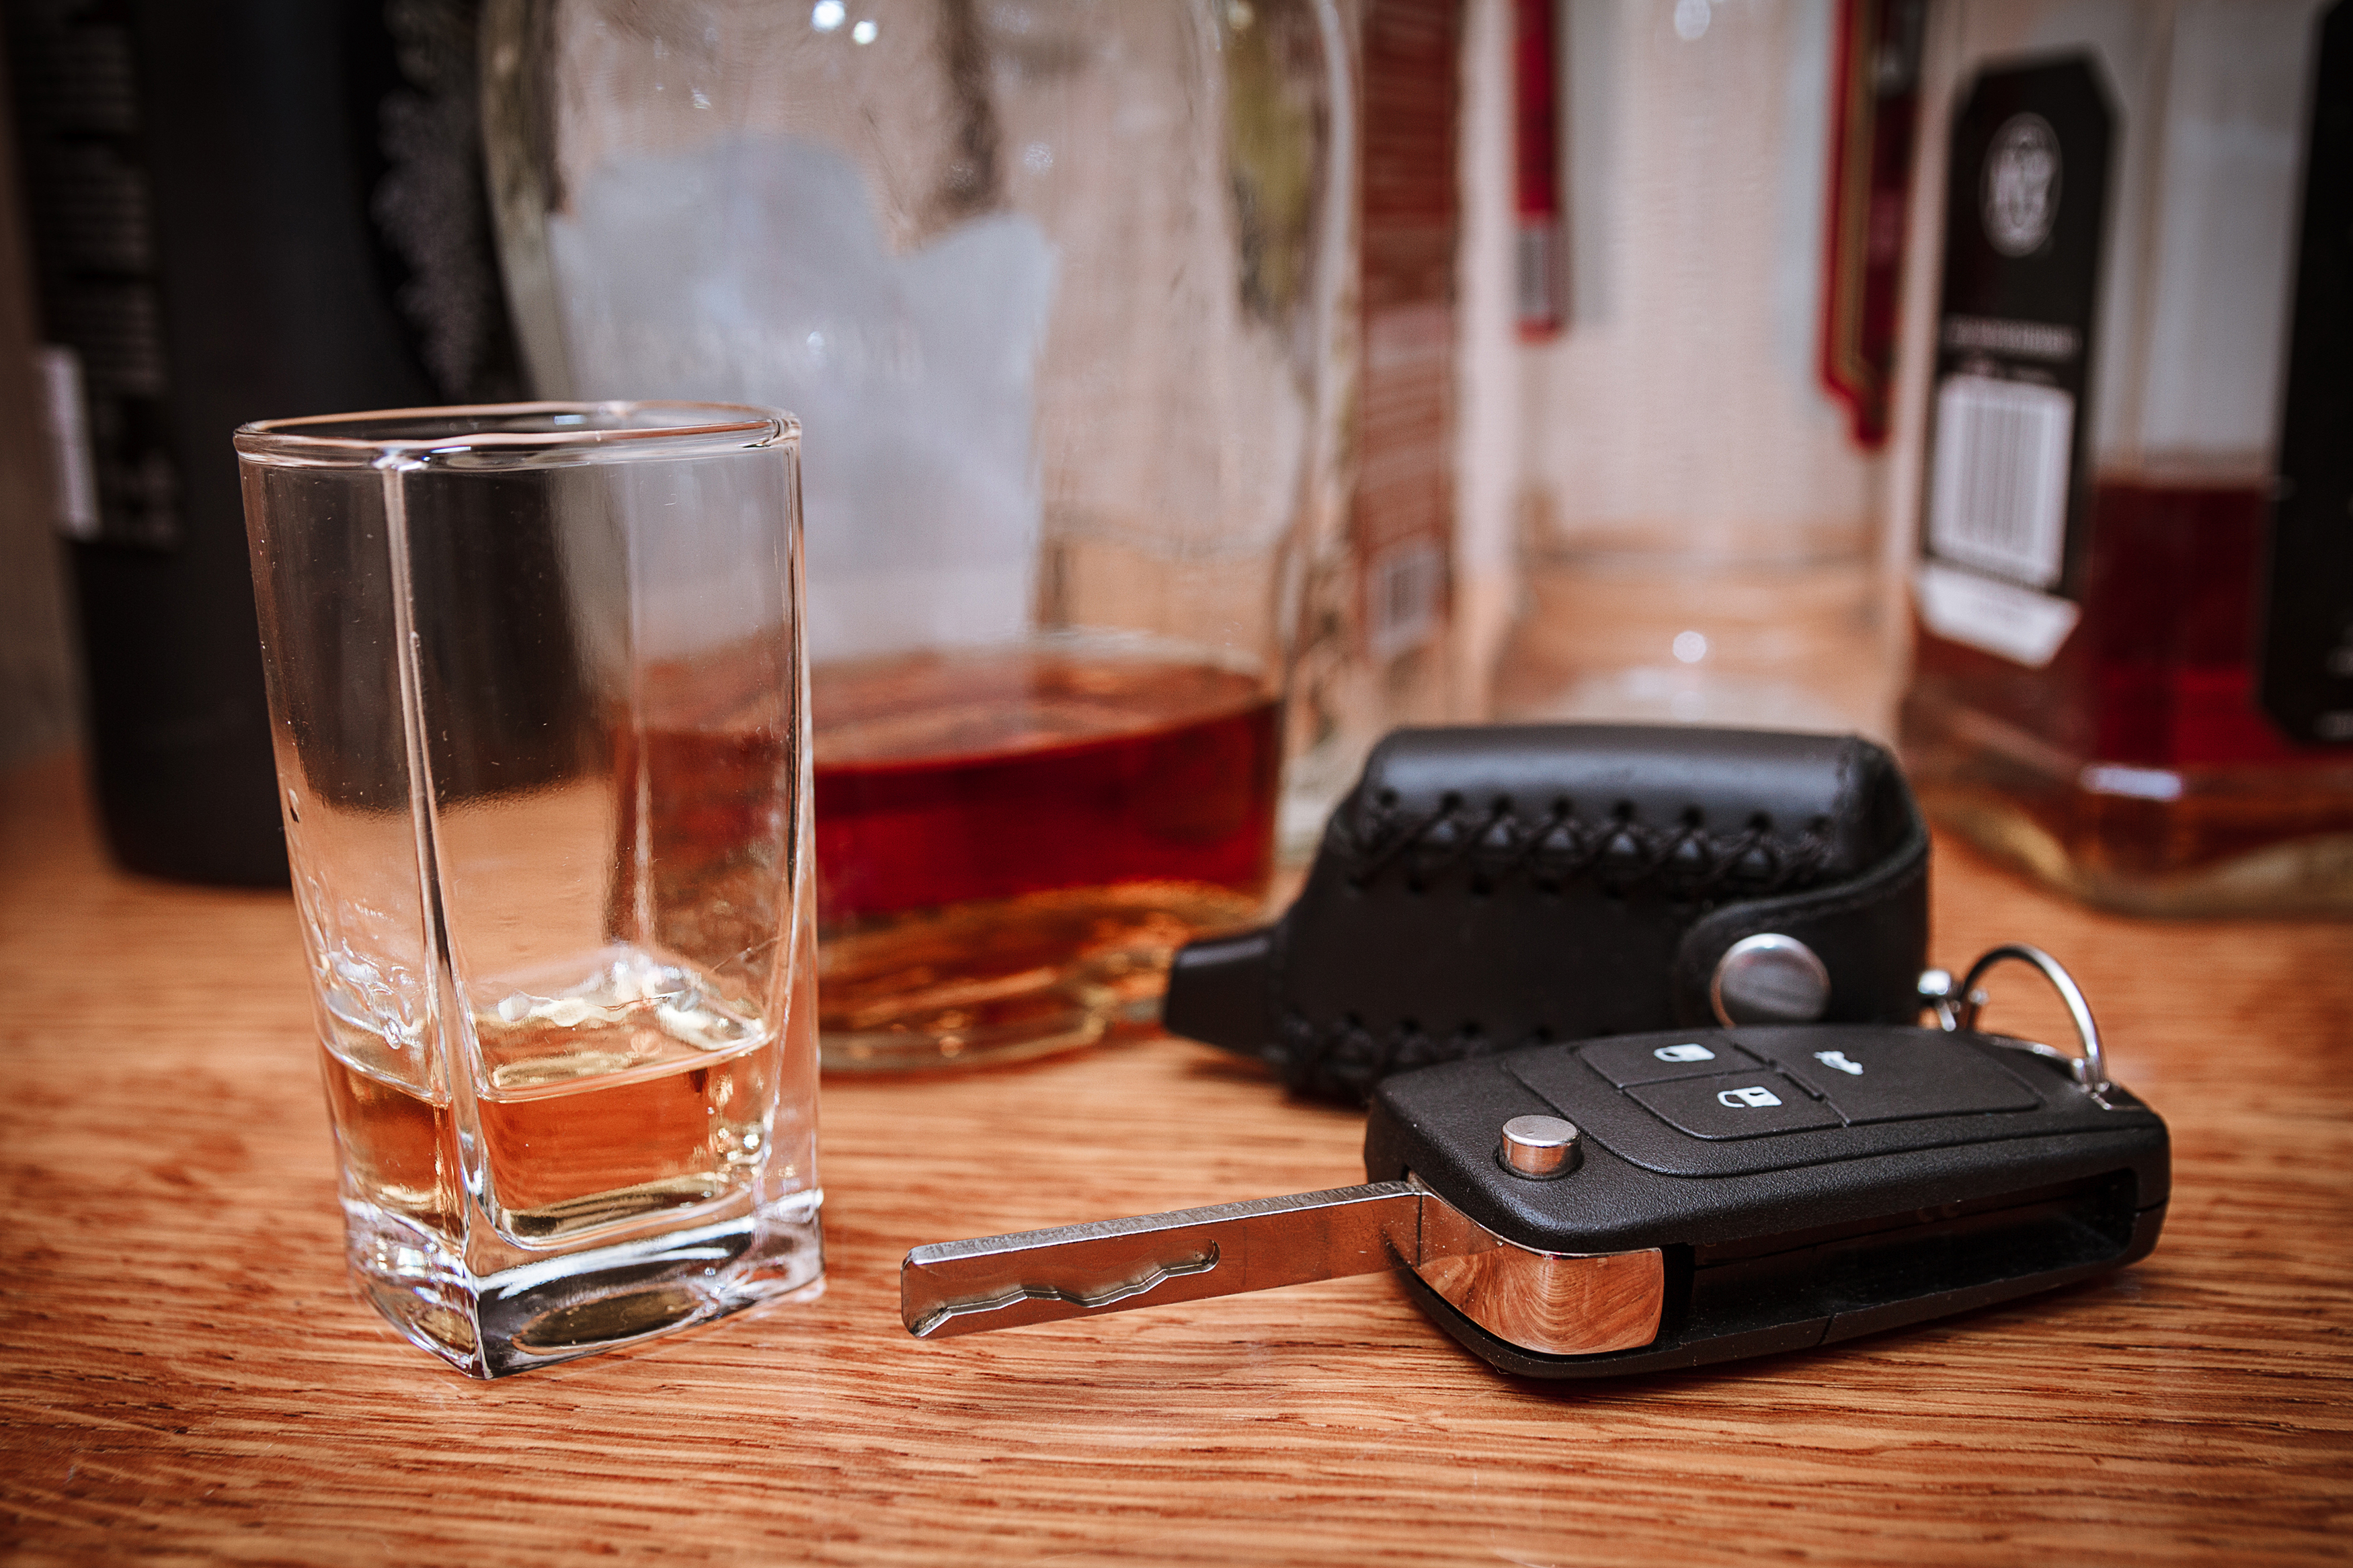 Alcohol and car keys - 2nd DUI offense in Florida